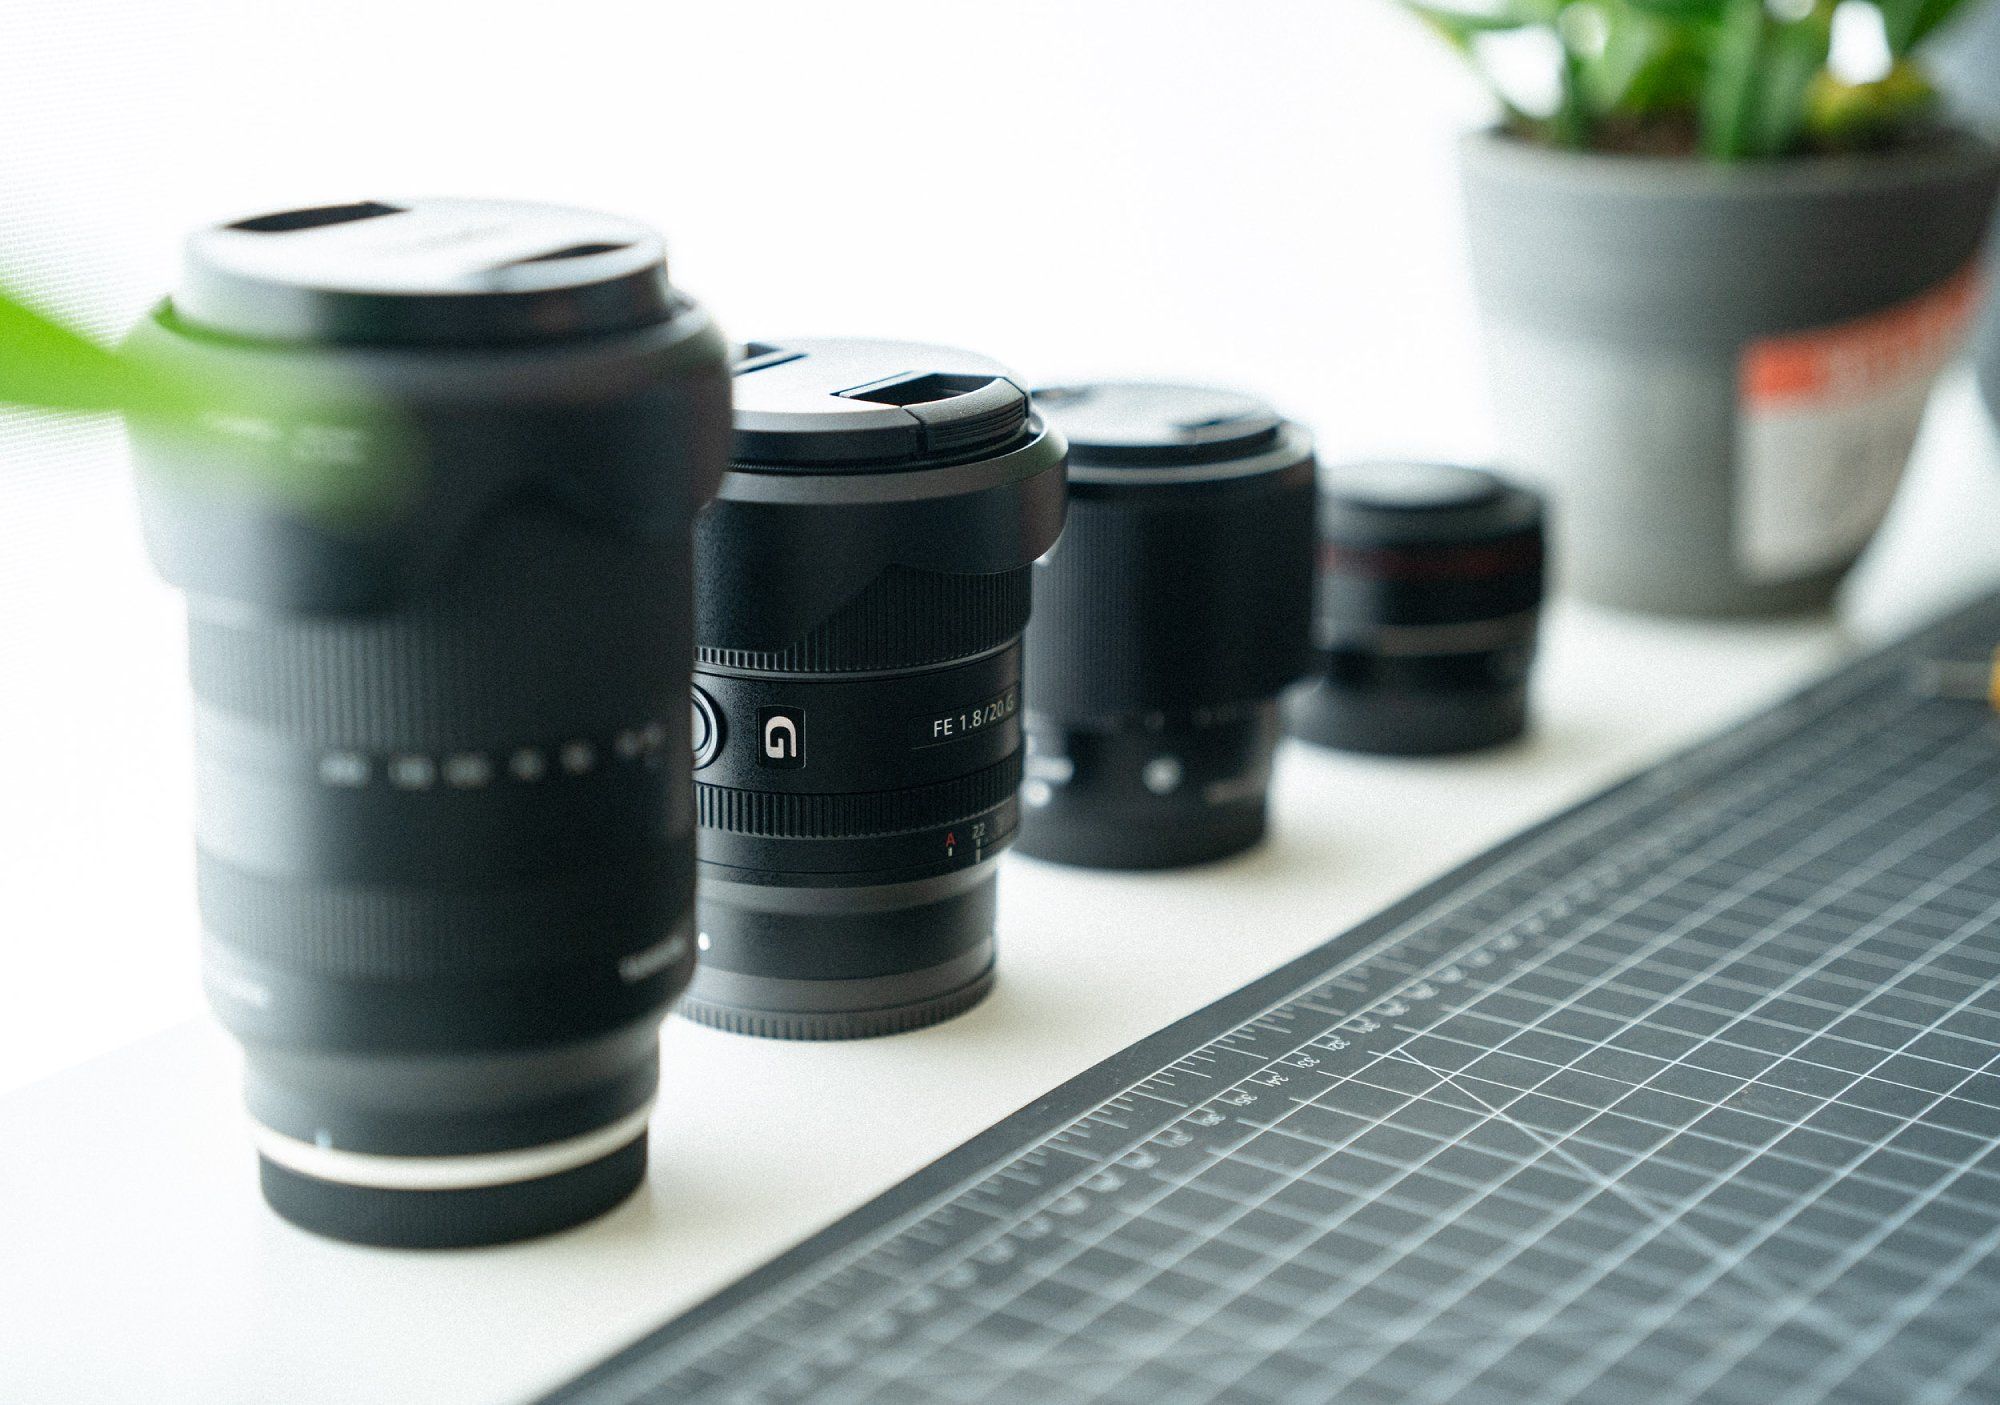 Four camera lenses, a cutting mat, and an indoor plant in the background